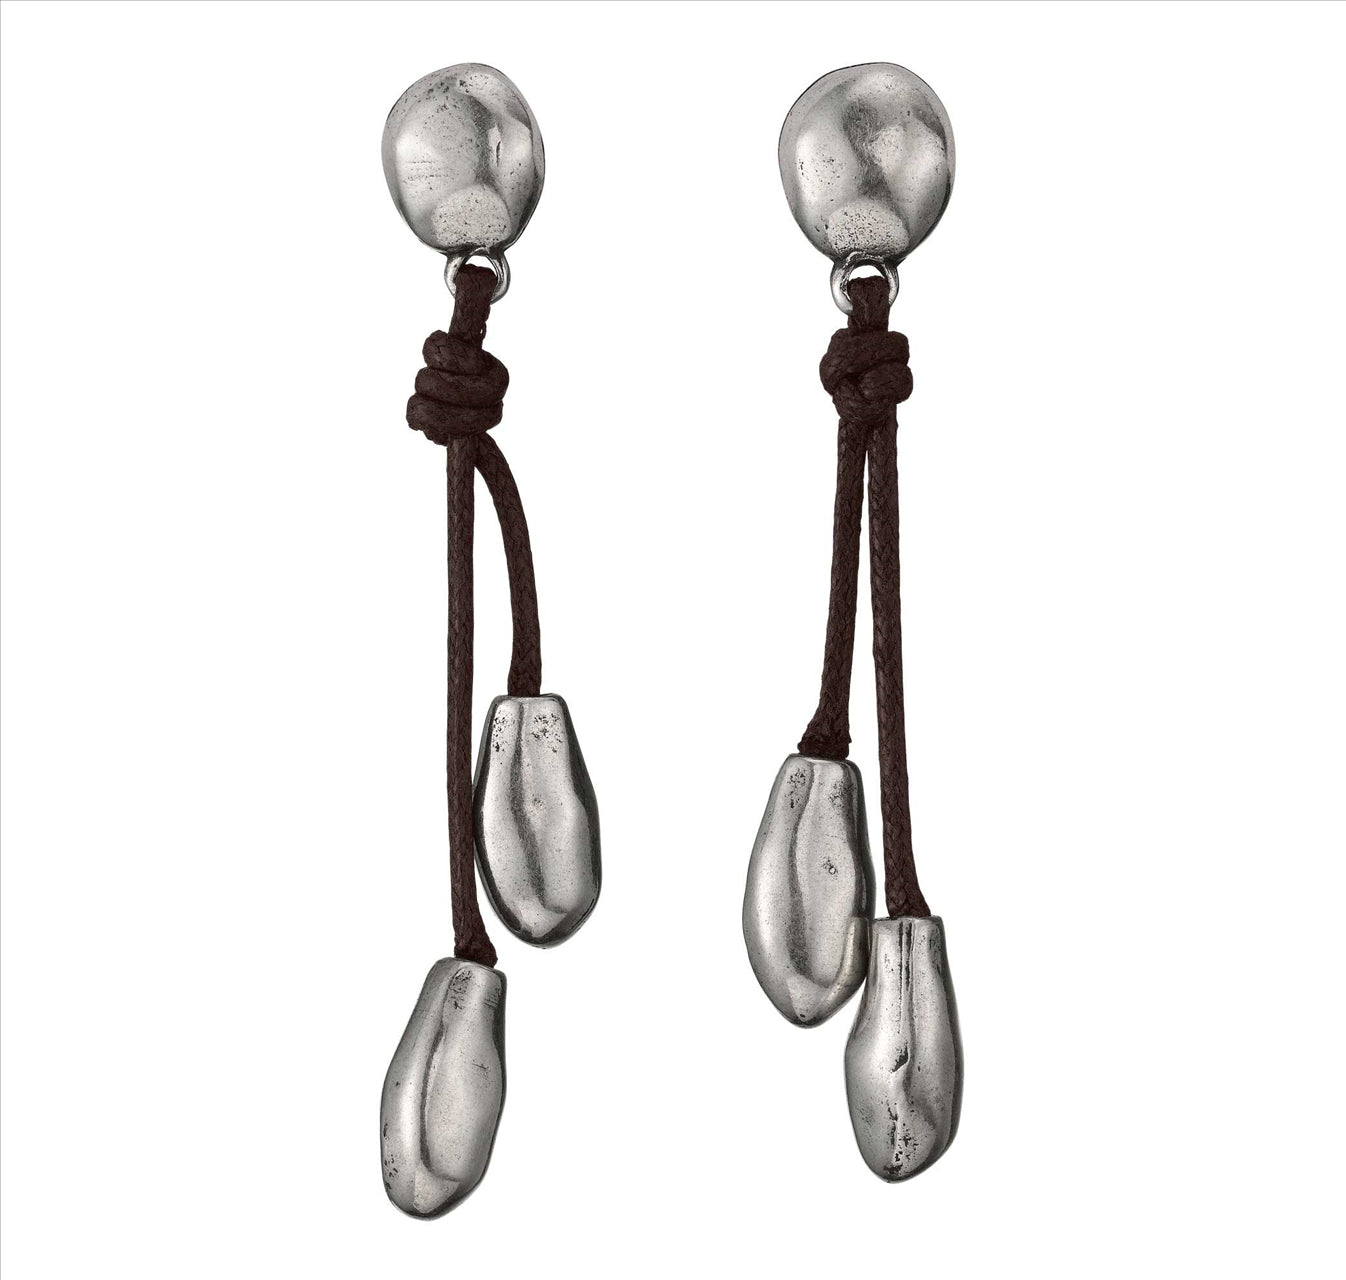 I LIKE YOU DROP BY DROP EARRINGS, Earrings in leather and metal mix plated in 15 micron silver.